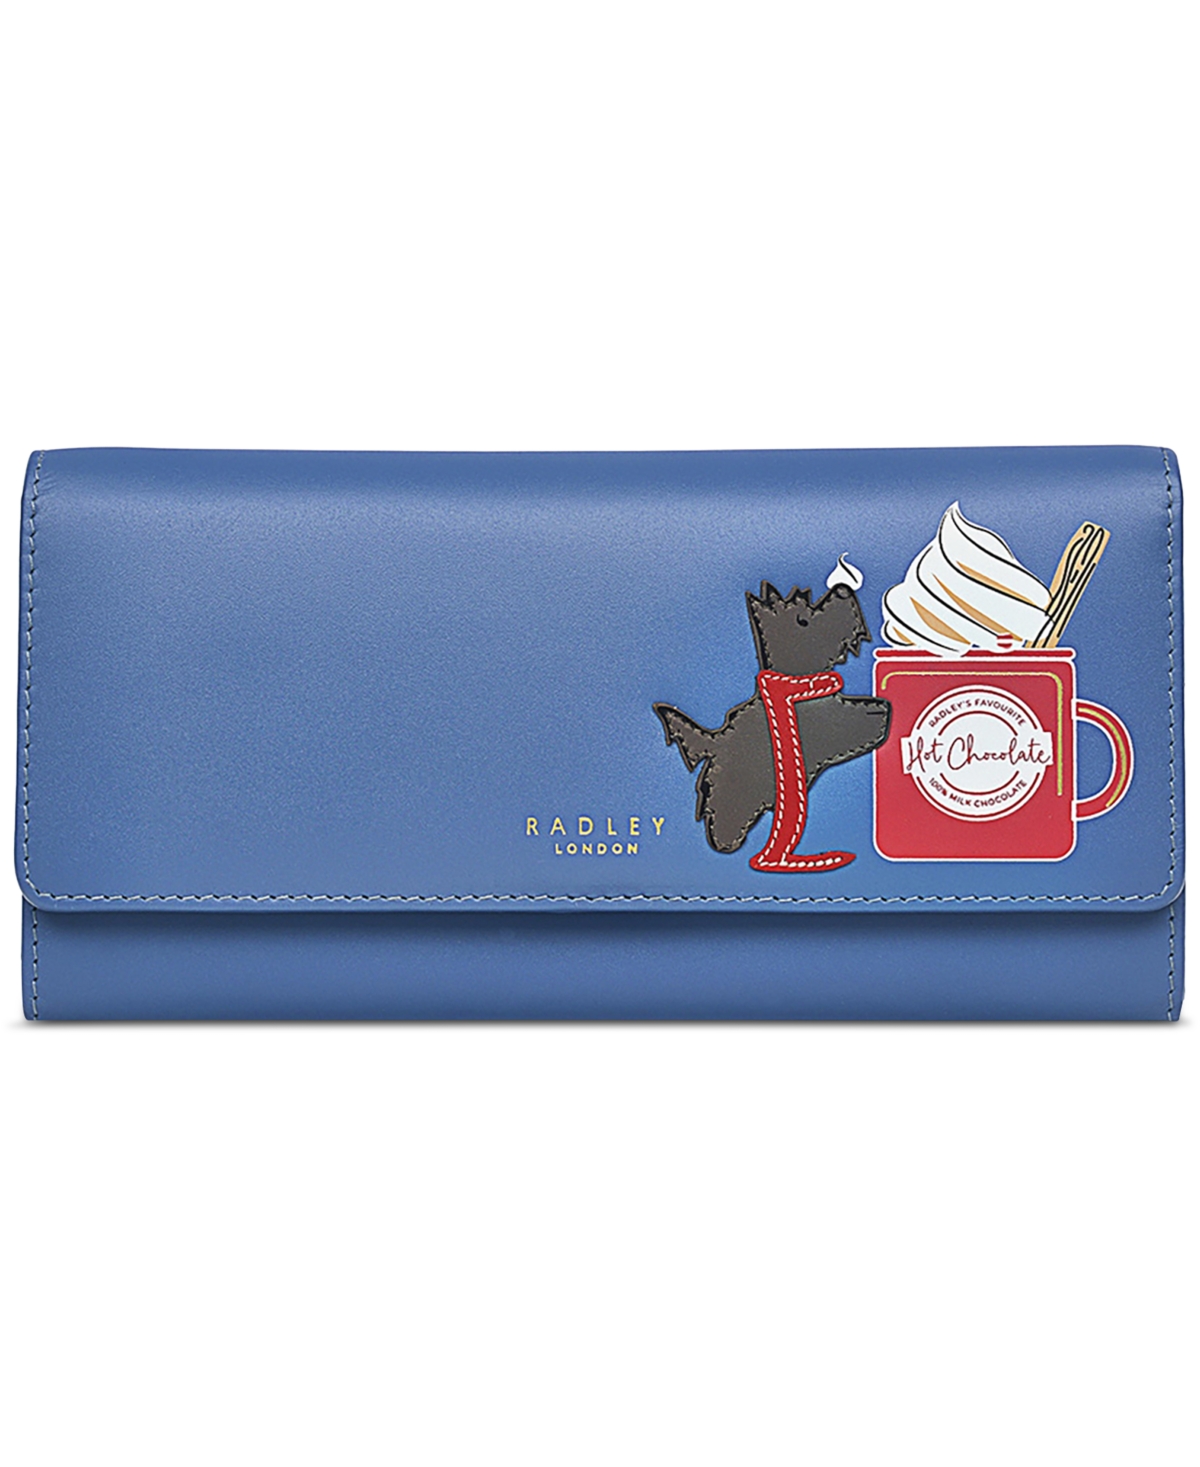 Radley London Radley Hot Chocolate Large Leather Flapover Wallet In Storm